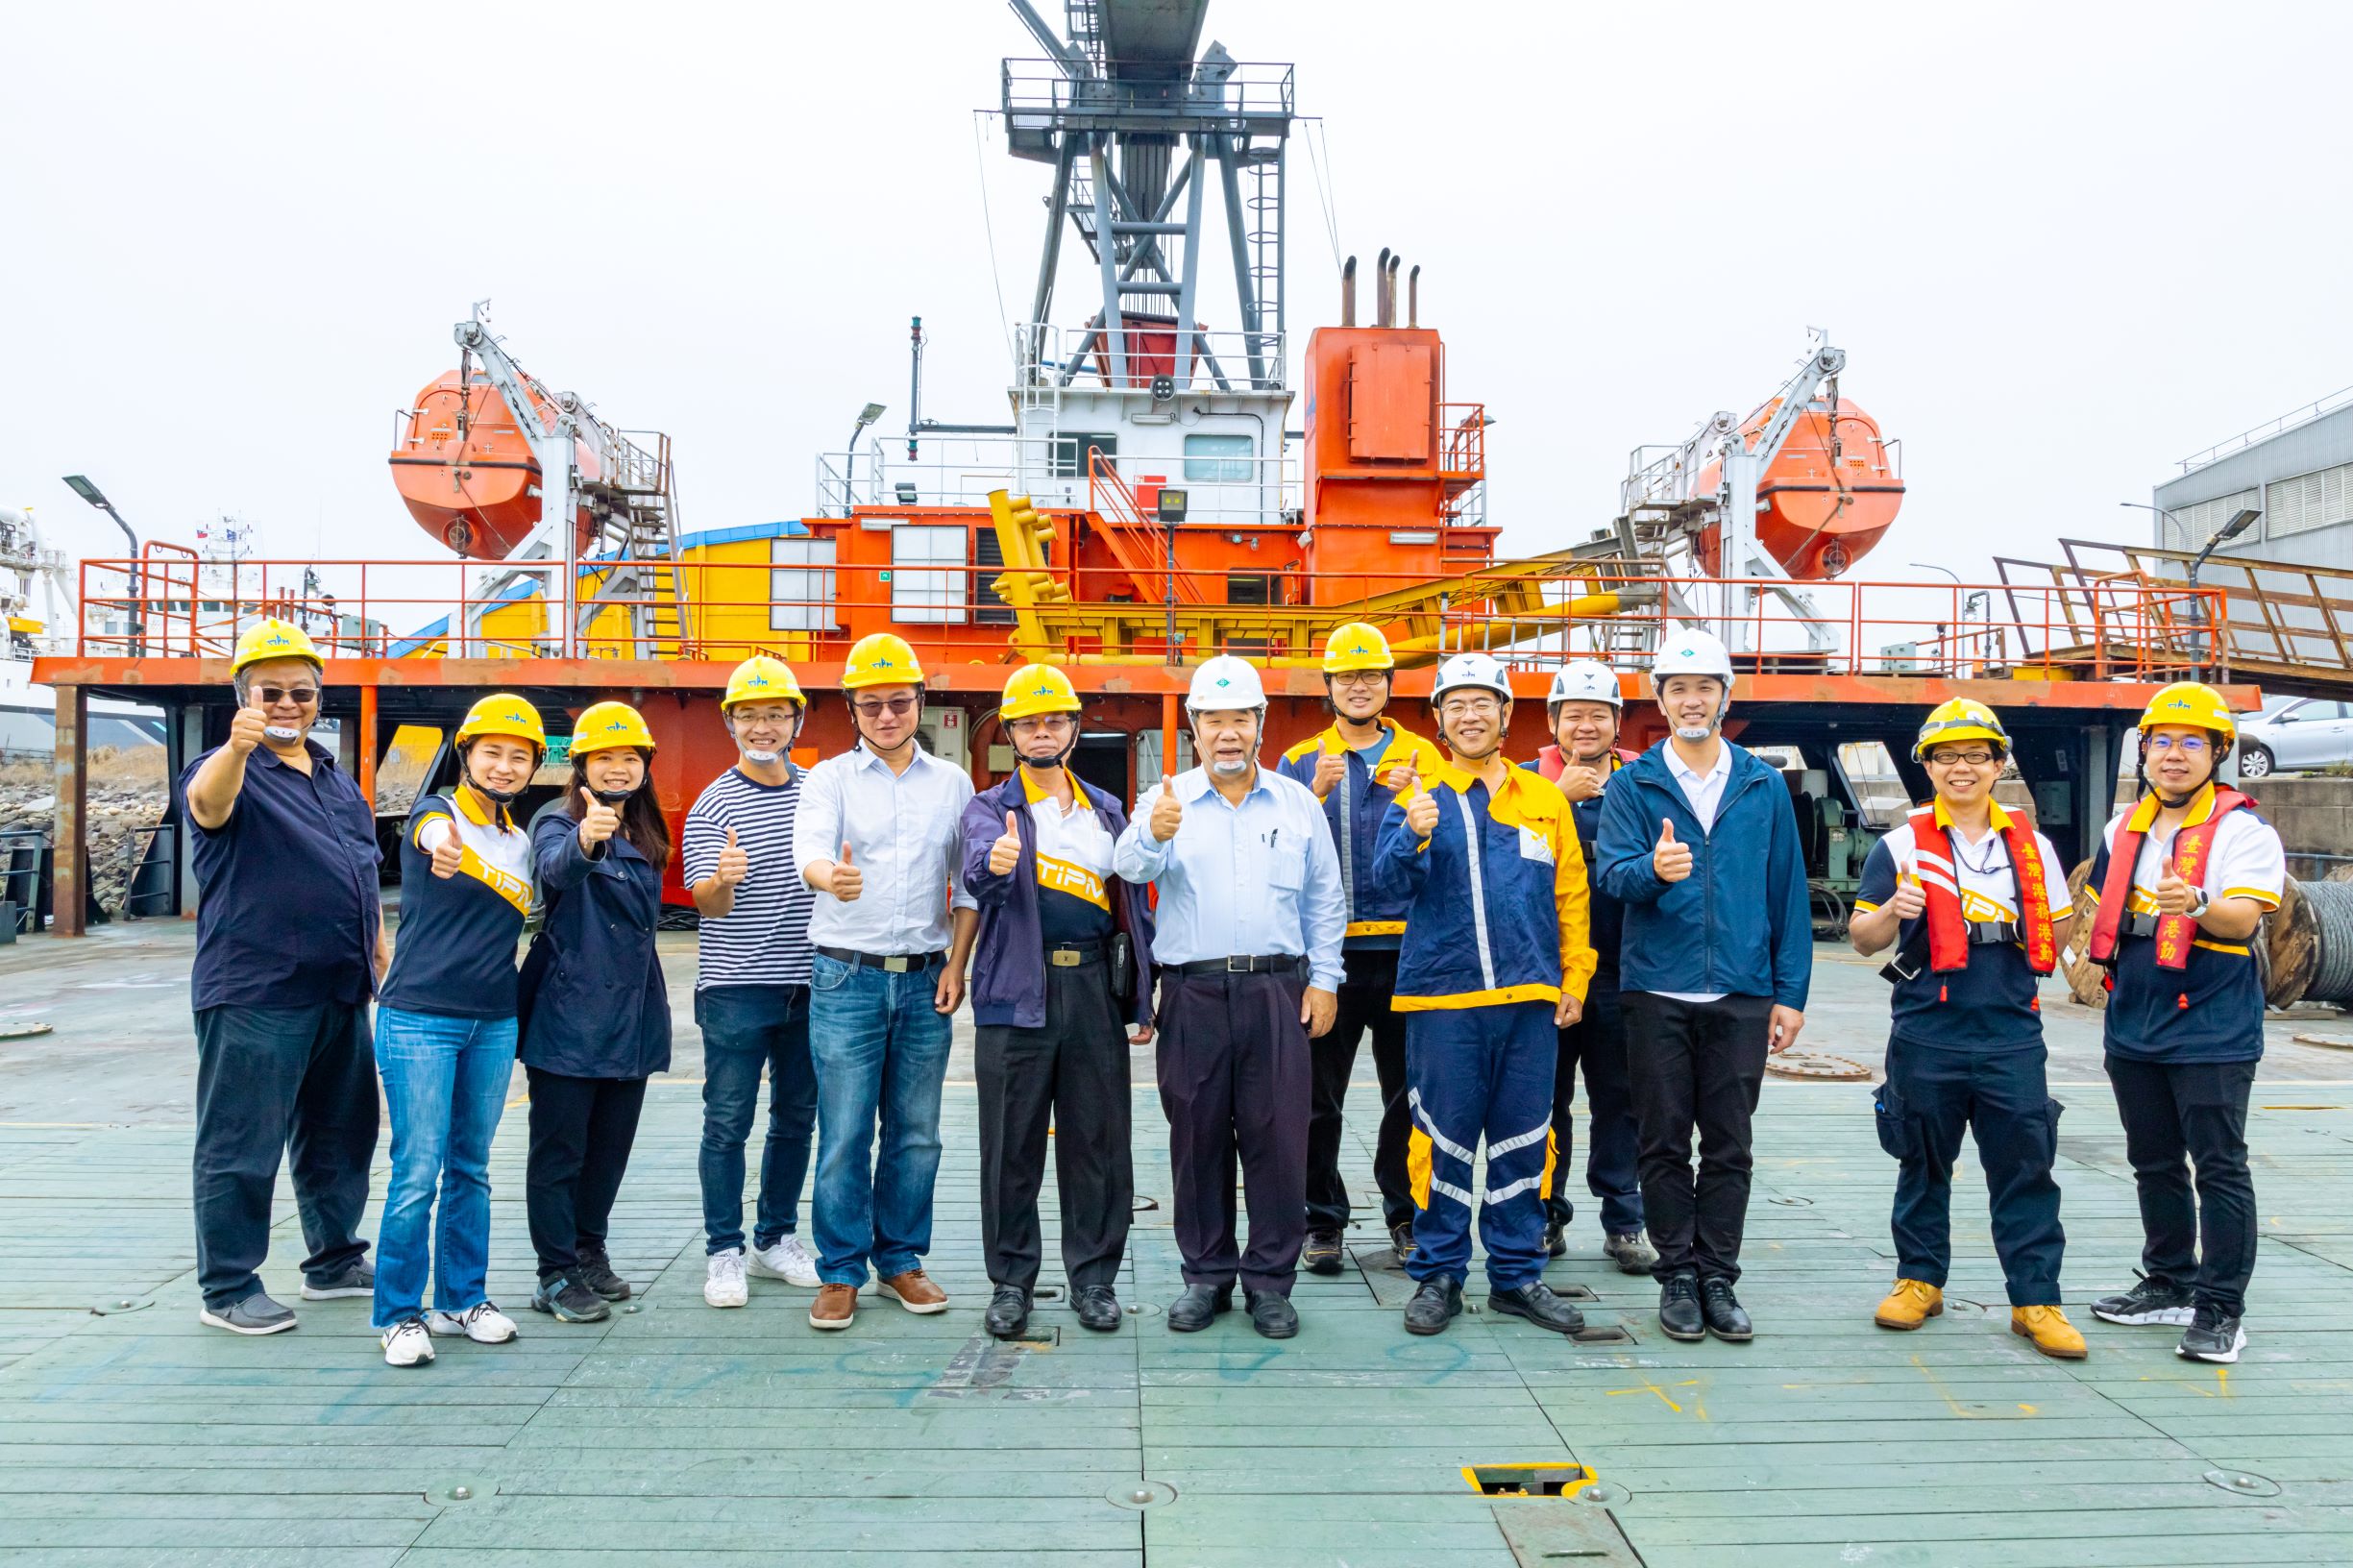 TIPM delivers and achieves the outstanding outcomes recognized by Taiwanese offshore wind industry